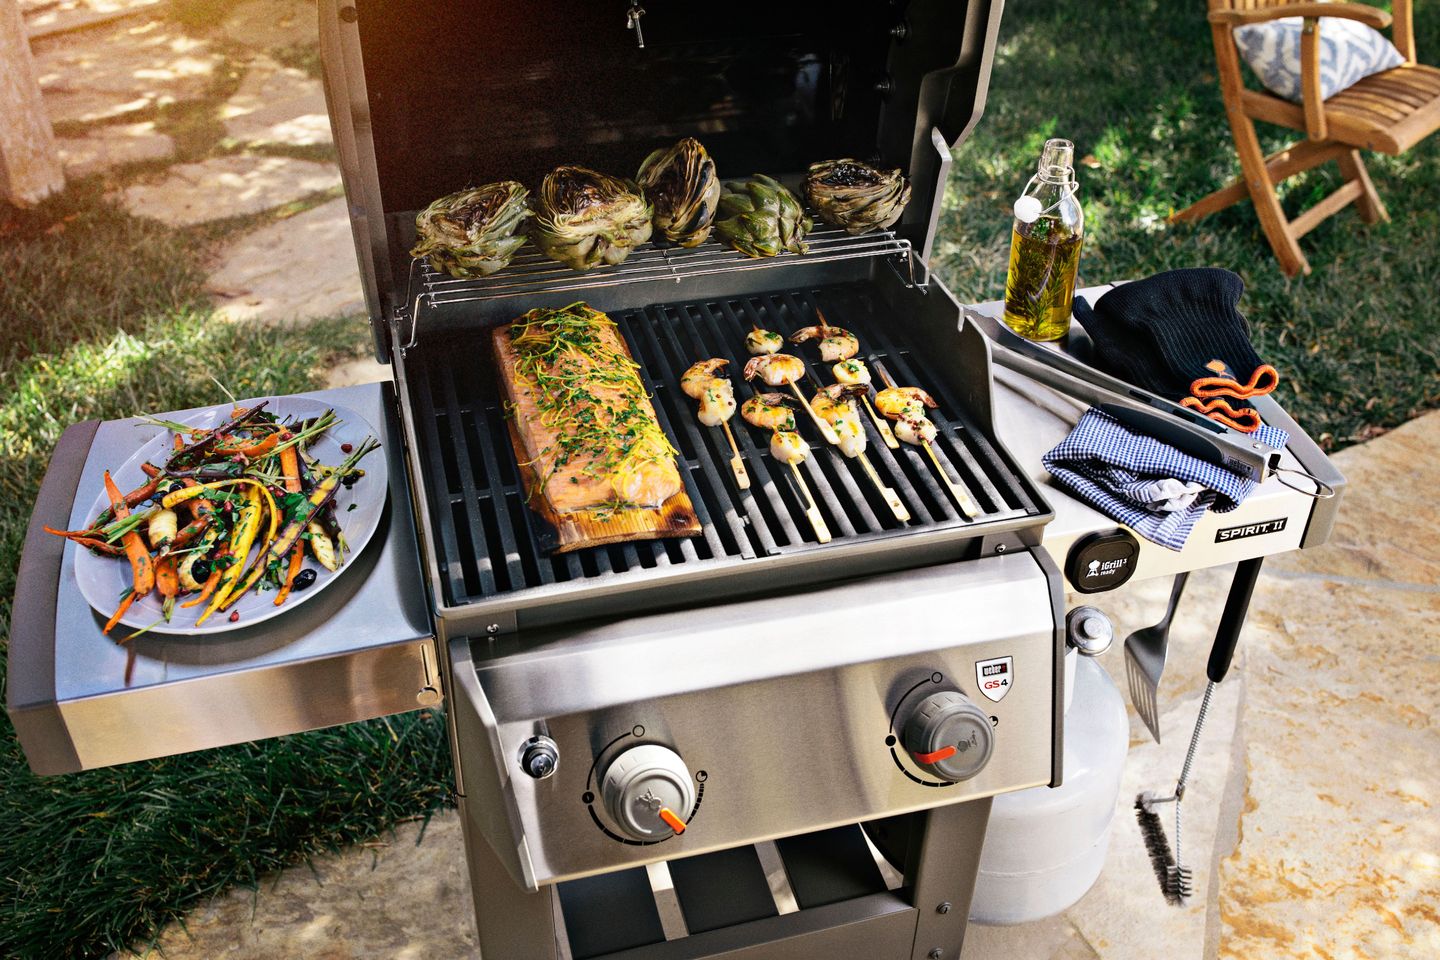 Best grill 2021 be a grill master with the 5 best grills Gardeningetc